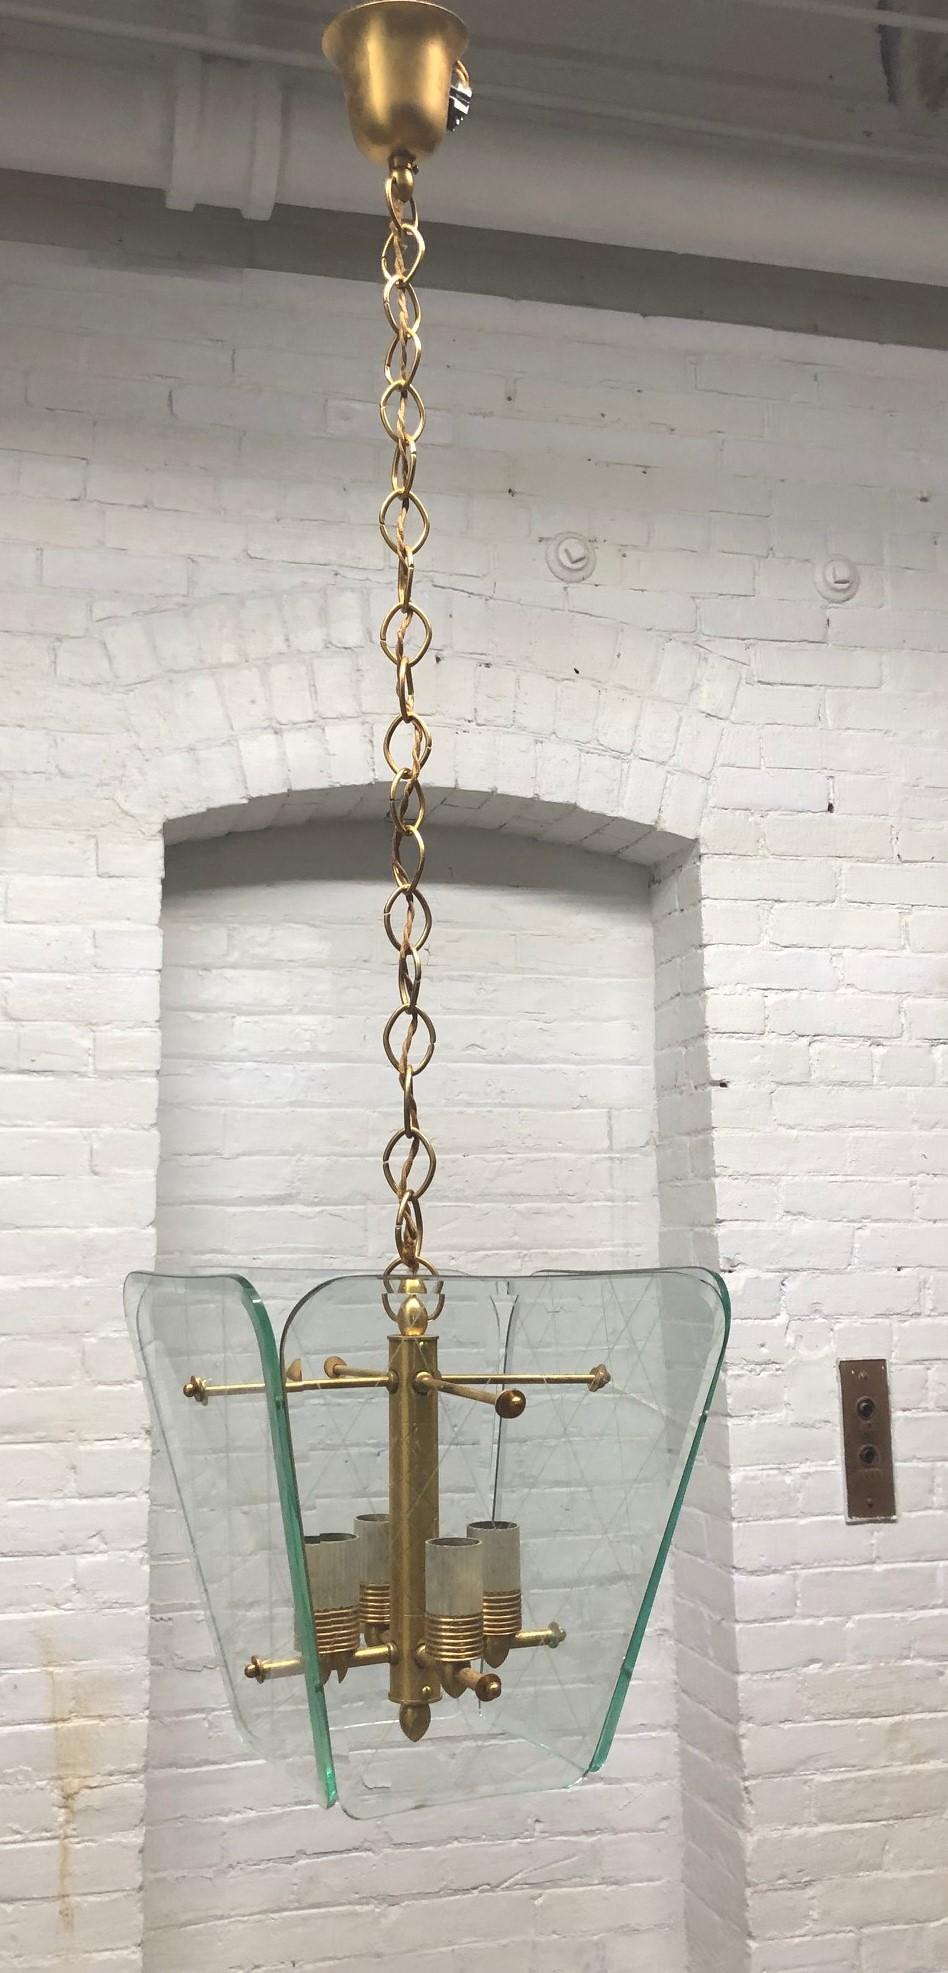 1940s Italian light fixture attributed to Pietro Chiesa for Fortana Arte. This glass has an etched diamond pattern with brass.
Measures from top to bottom: 37.5 H. Light fixture itself: 10 W x 9.5 H x 10 D.